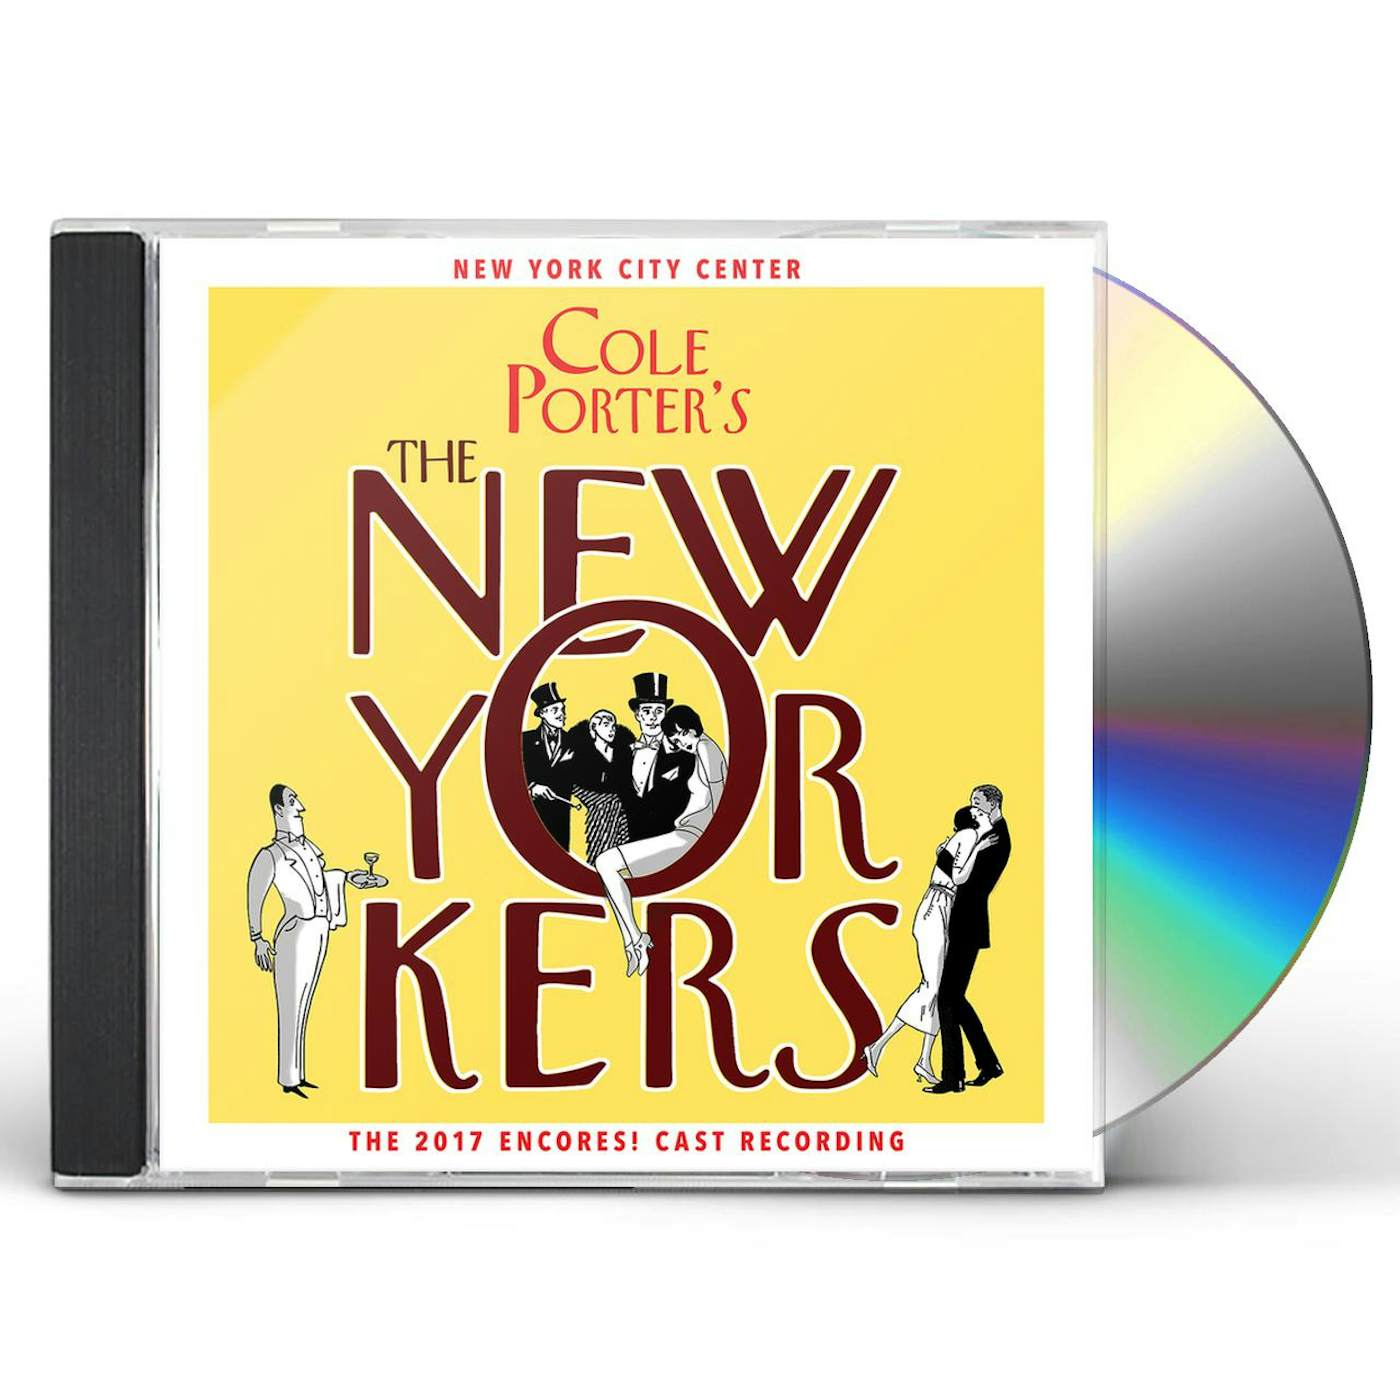 COLE PORTER'S THE NEW YORKERS CD